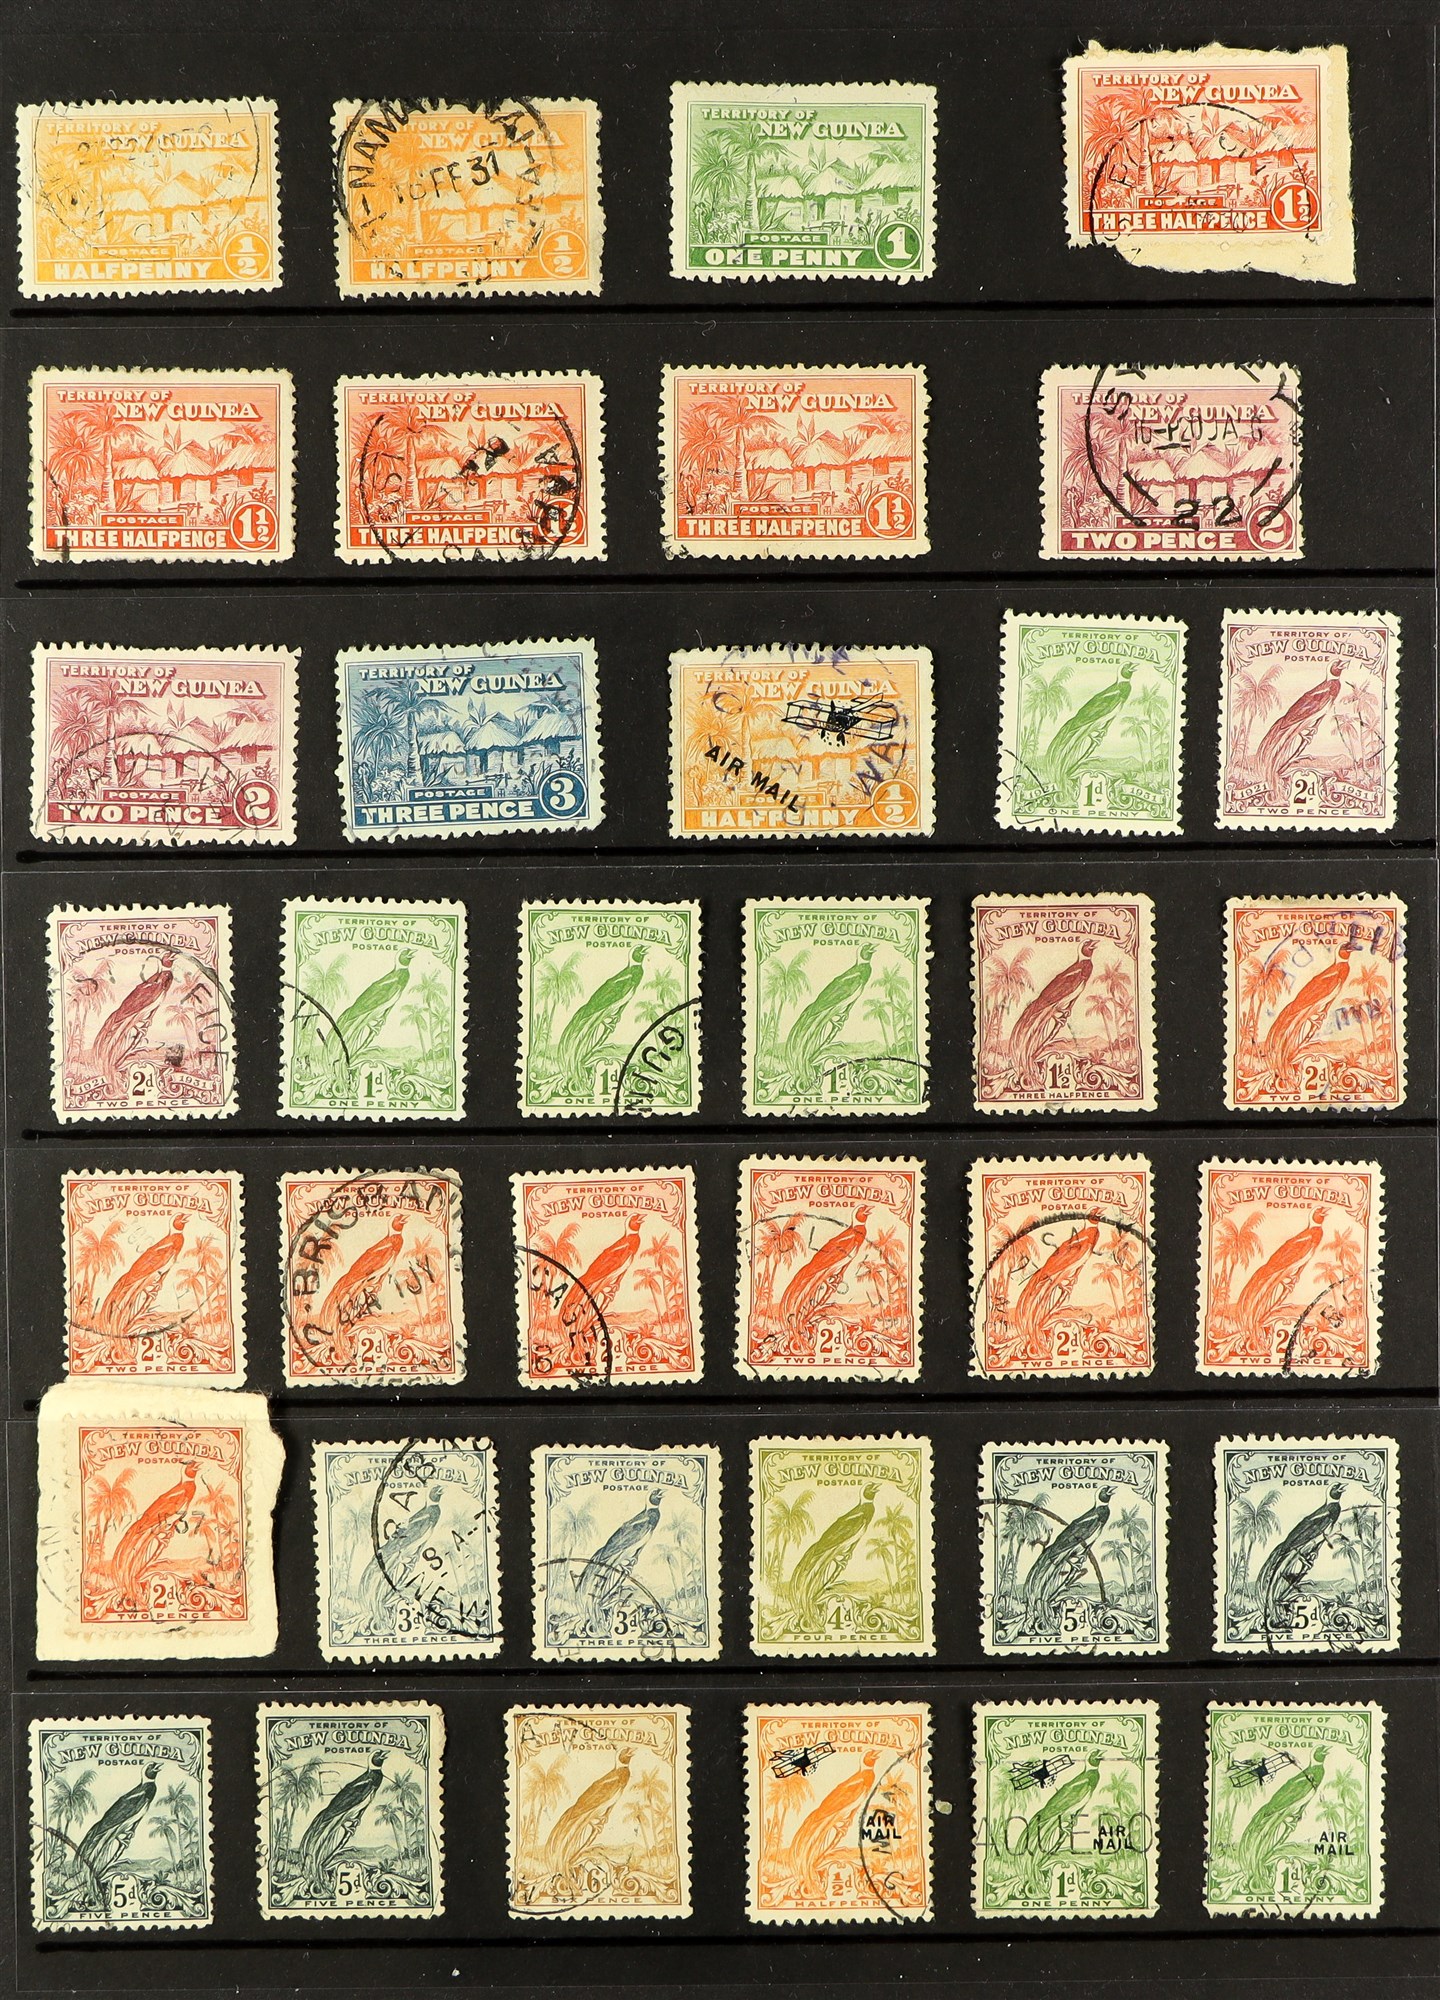 NEW GUINEA 1915 - 1939 SPECIALISED ASSORTMENT of 100+ used stamps on various pages collected for - Image 9 of 10